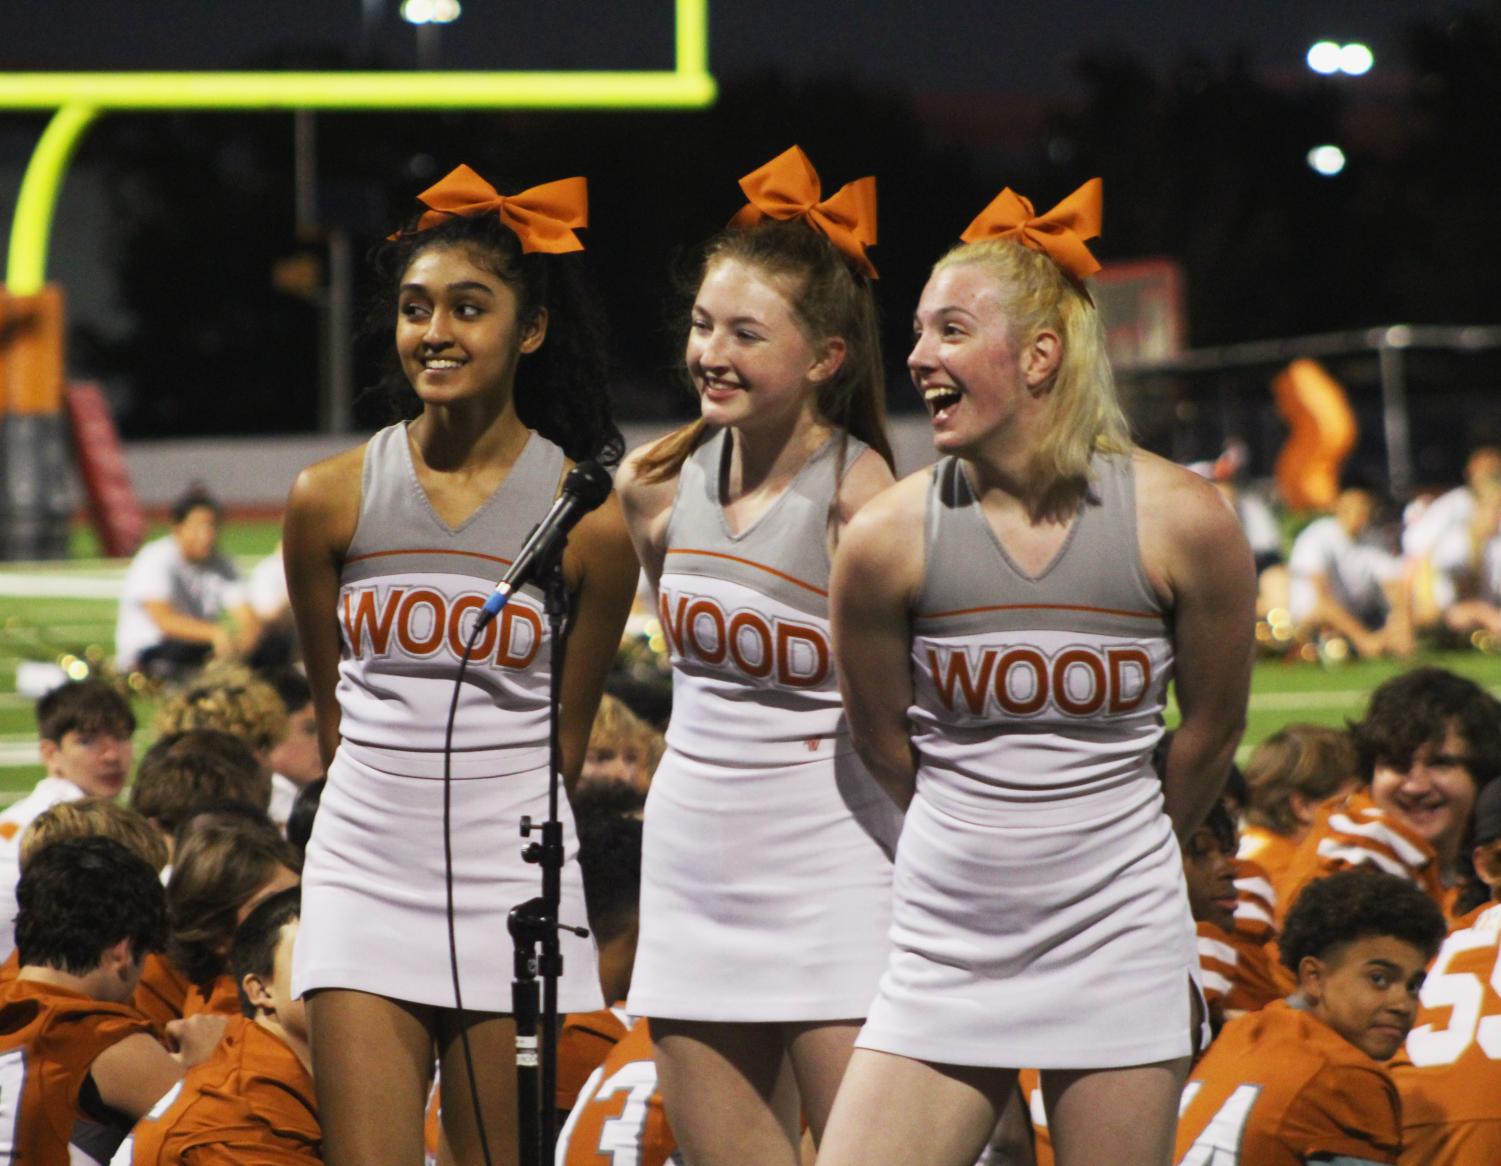 Warriors+Showcase+School+Spirit+and+Style+at+Annual+Homecoming+Parade